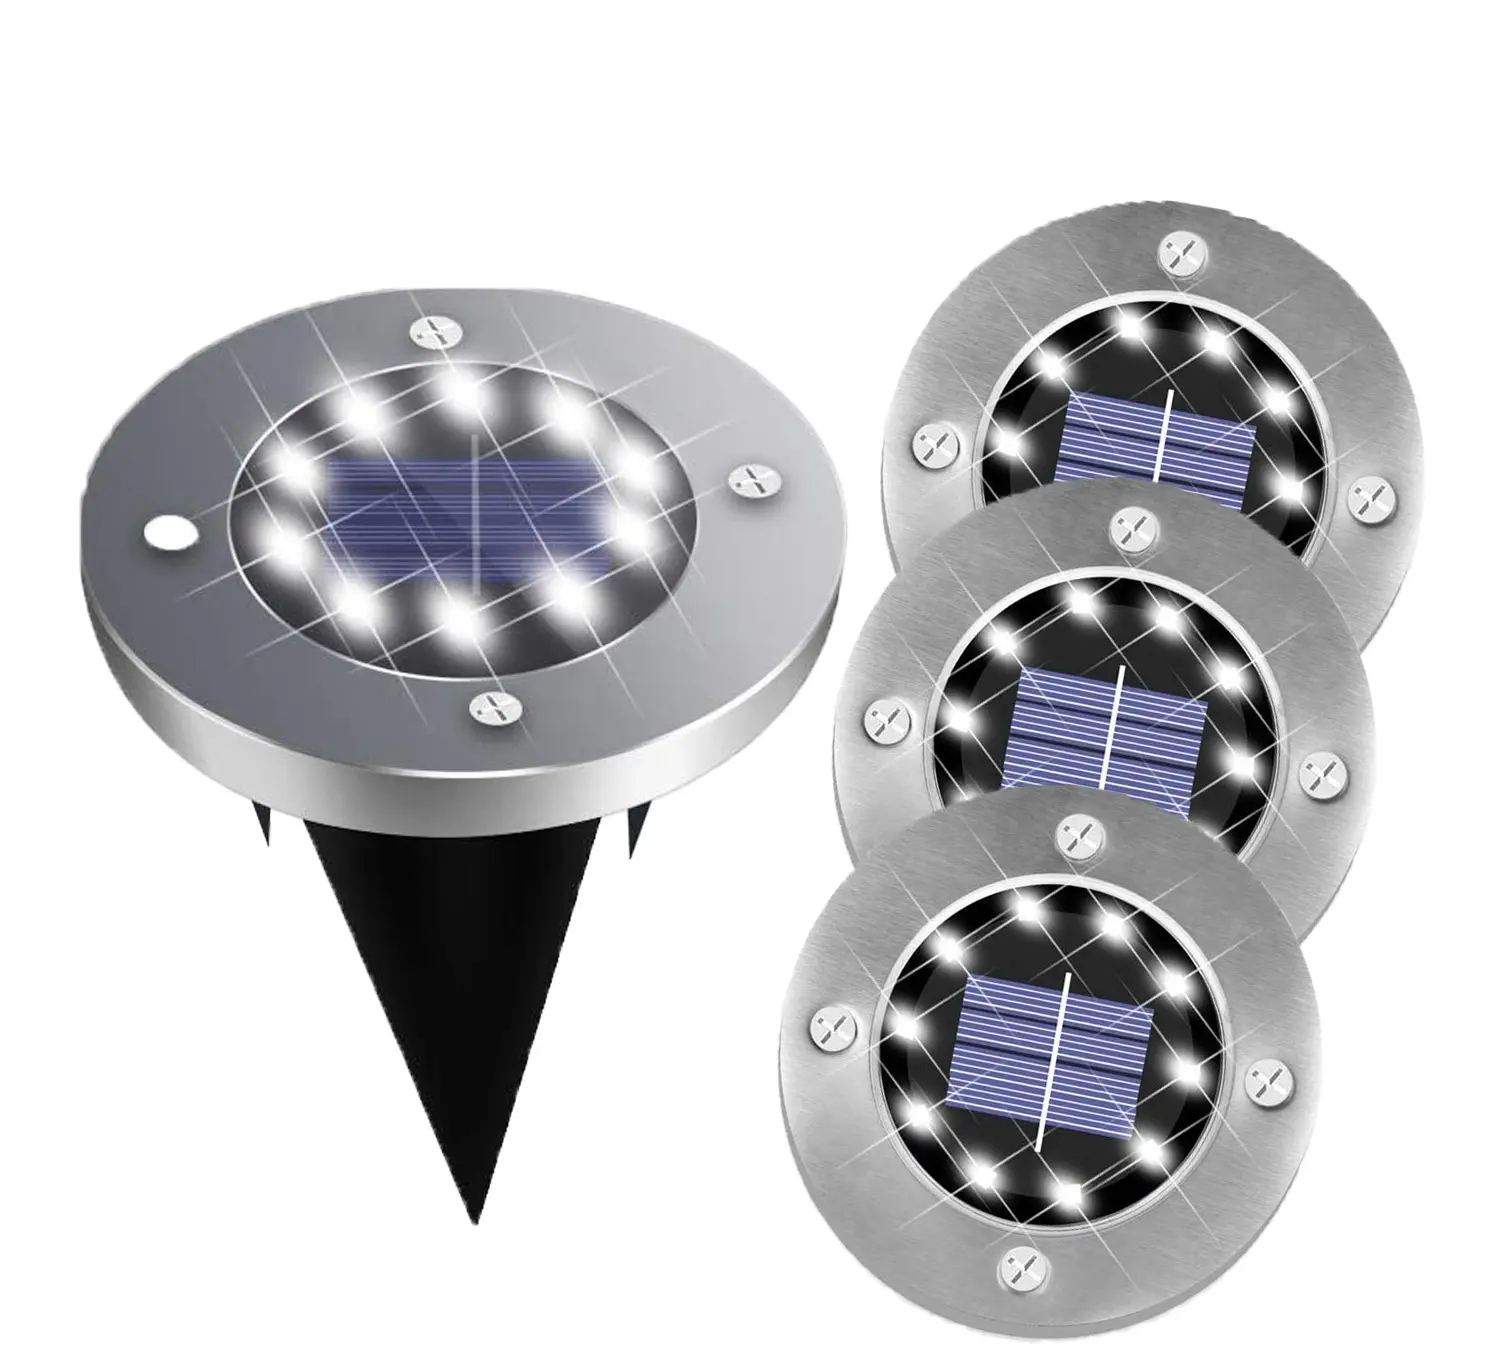 Solar Lights For Outdoor Garden Led Landscape Light / Pathway Lights,Bright White,Waterproof,Stainless Steel